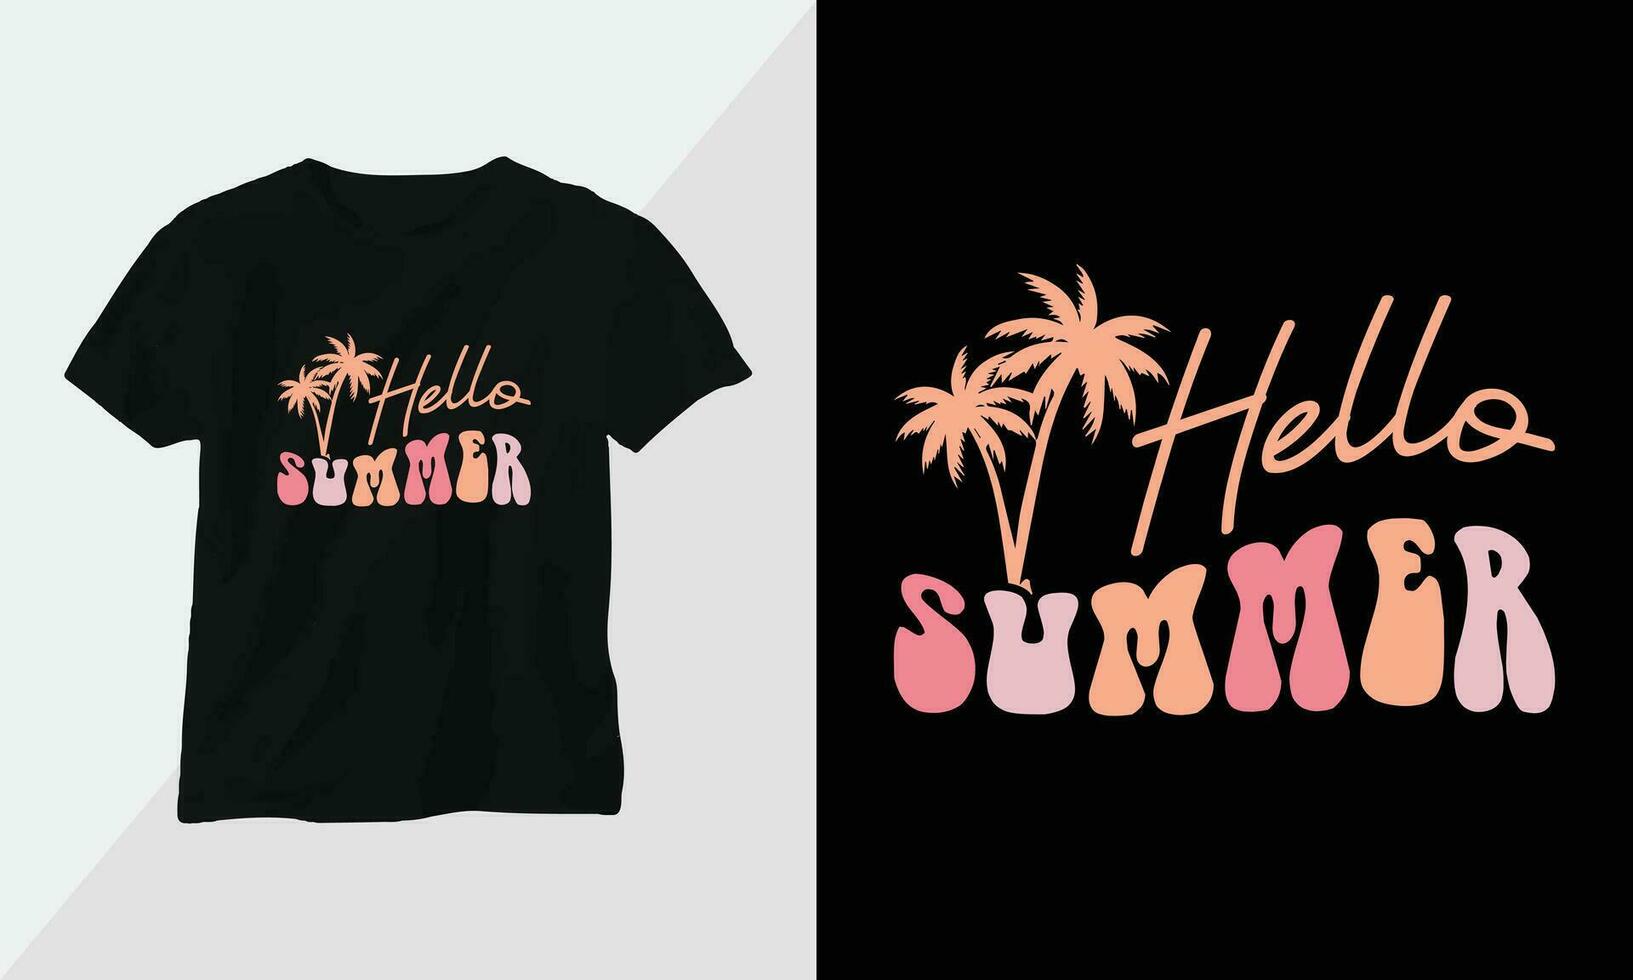 Wavy Retro Groovy T-shirt Design. Quotes with Hello Summer Design vector Graphic Design T-Shirt, mag, sticker, wall mat, etc. Design vector Graphic Template